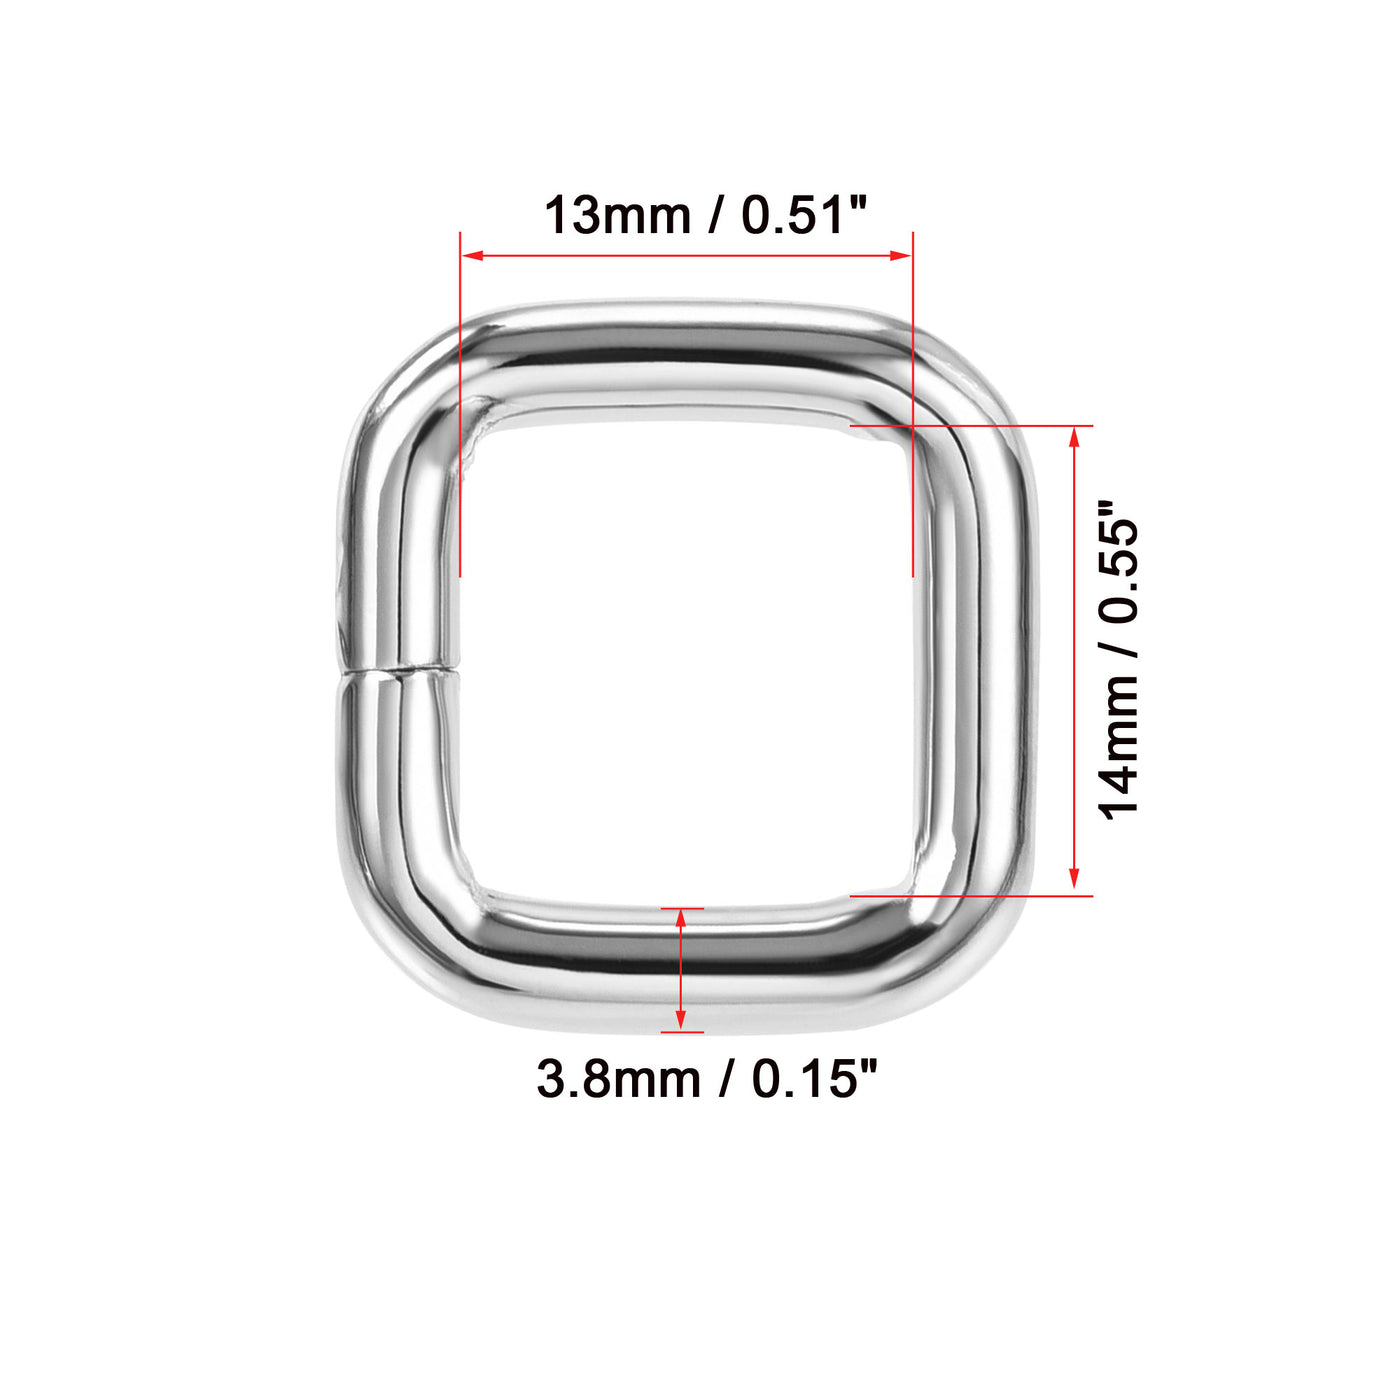 uxcell Uxcell Metal Rectangle Ring Buckles 14x13mm for Bags Belts DIY Silver Tone 20pcs